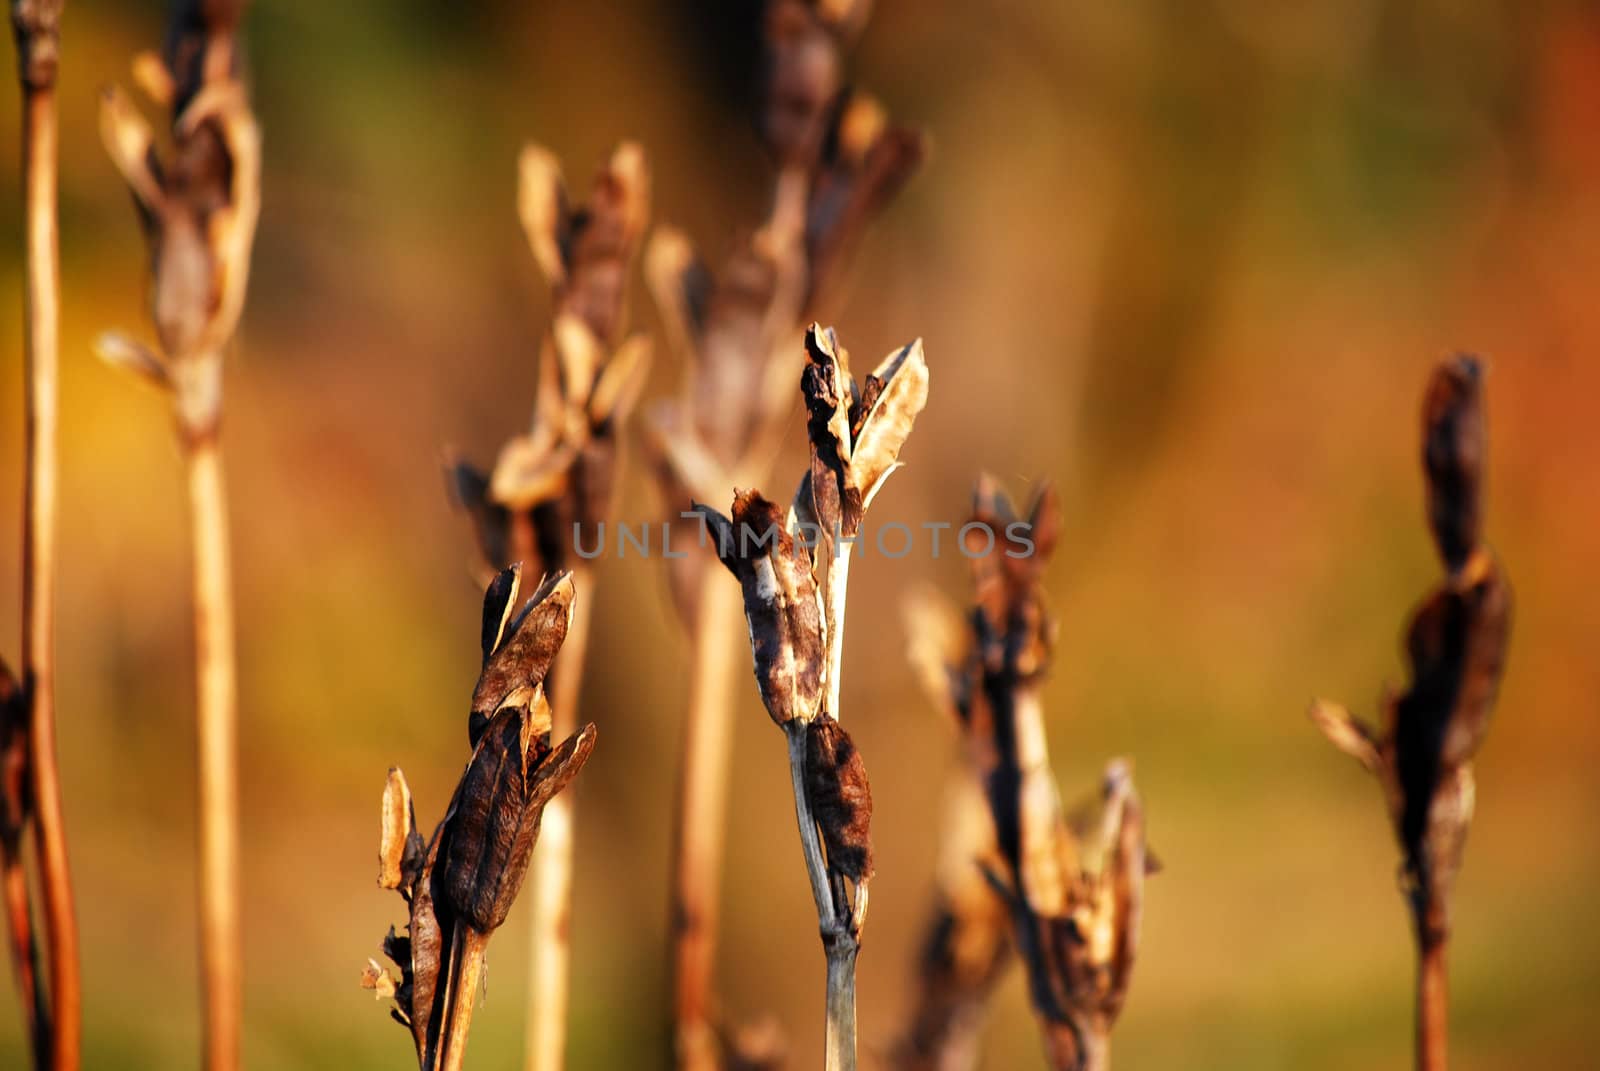 Dry plants in the autumn day, photo taken on a sunny day